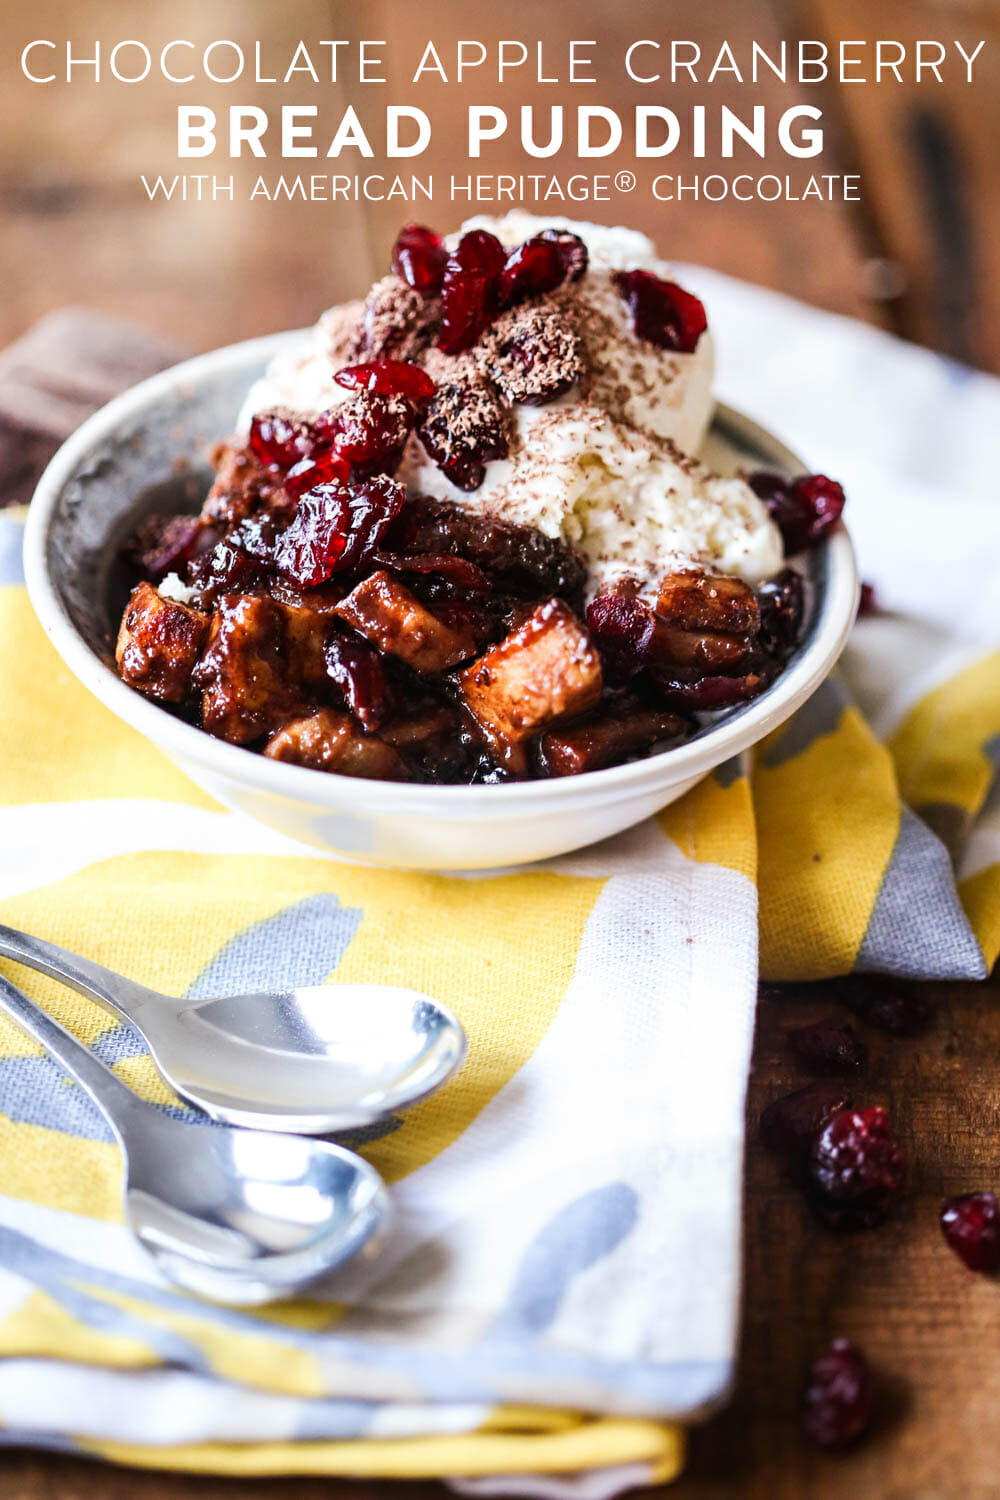 Cranberry Chocolate Bread Pudding